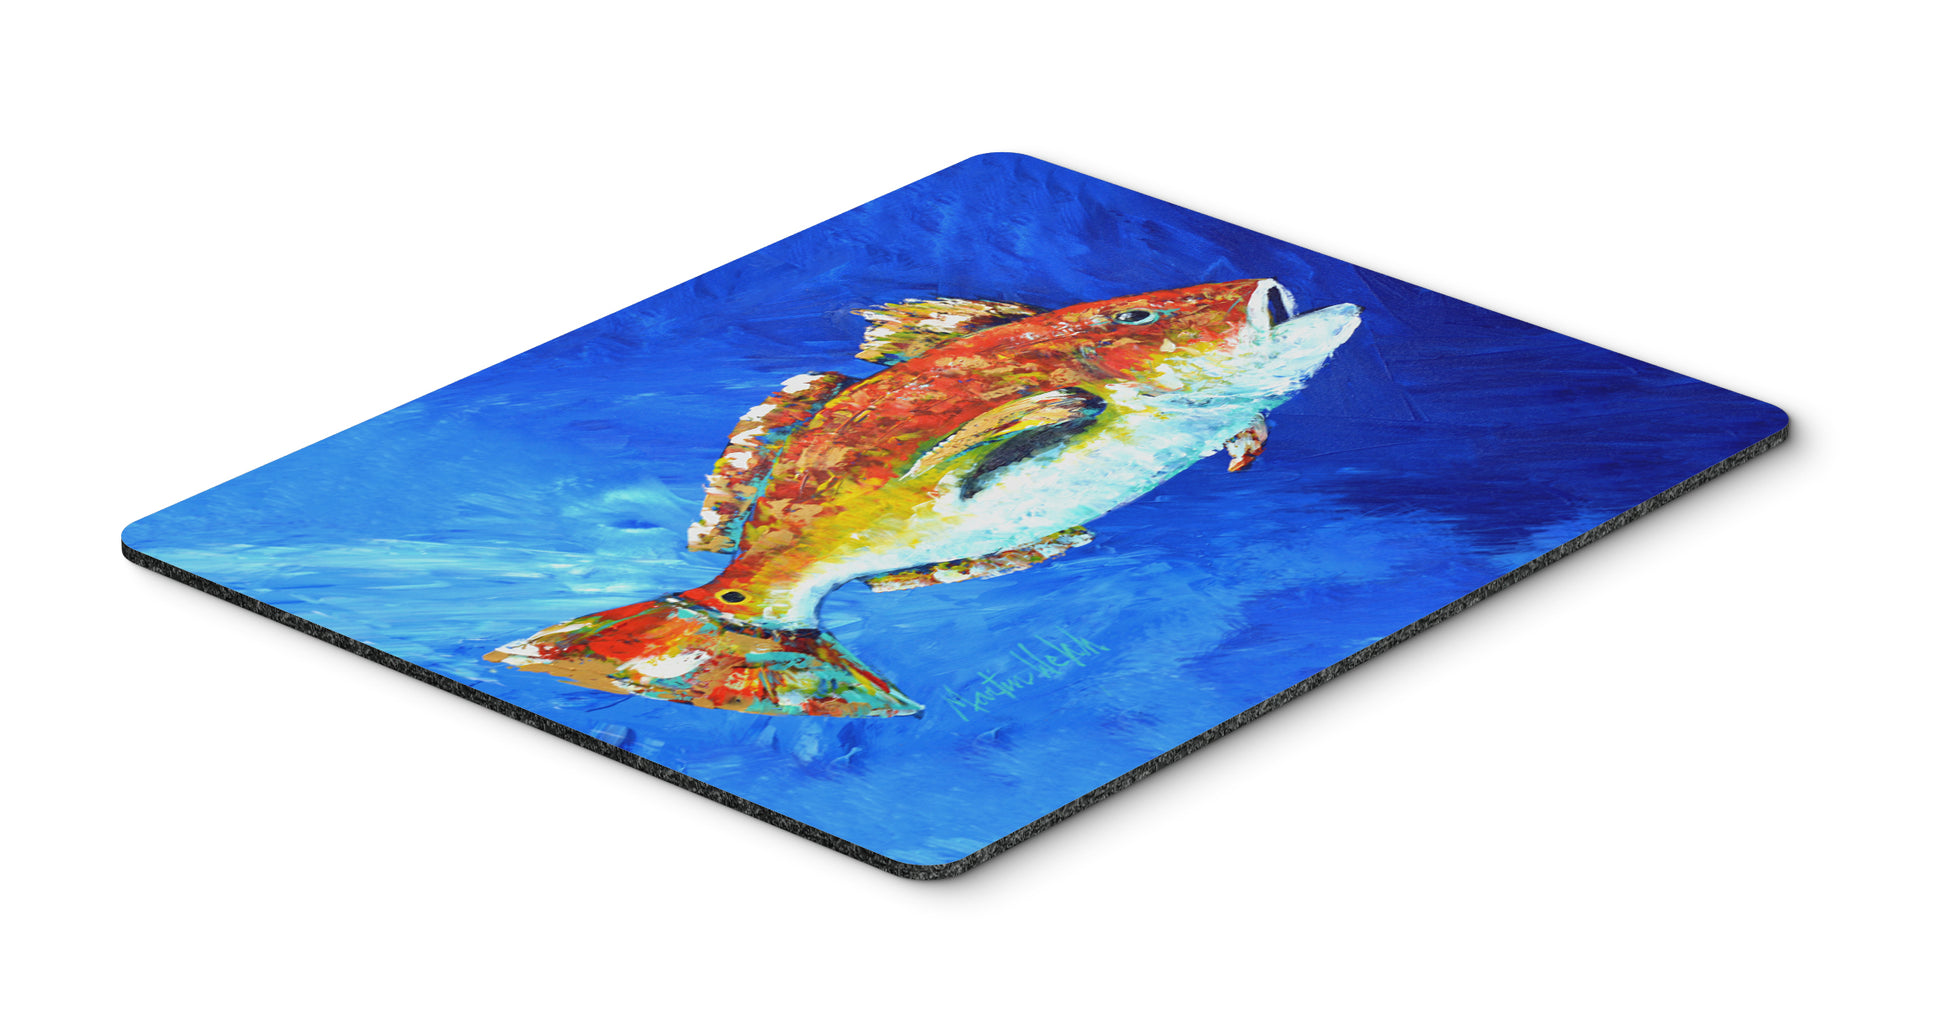 Buy this Red Fish White Spin Mouse Pad, Hot Pad or Trivet